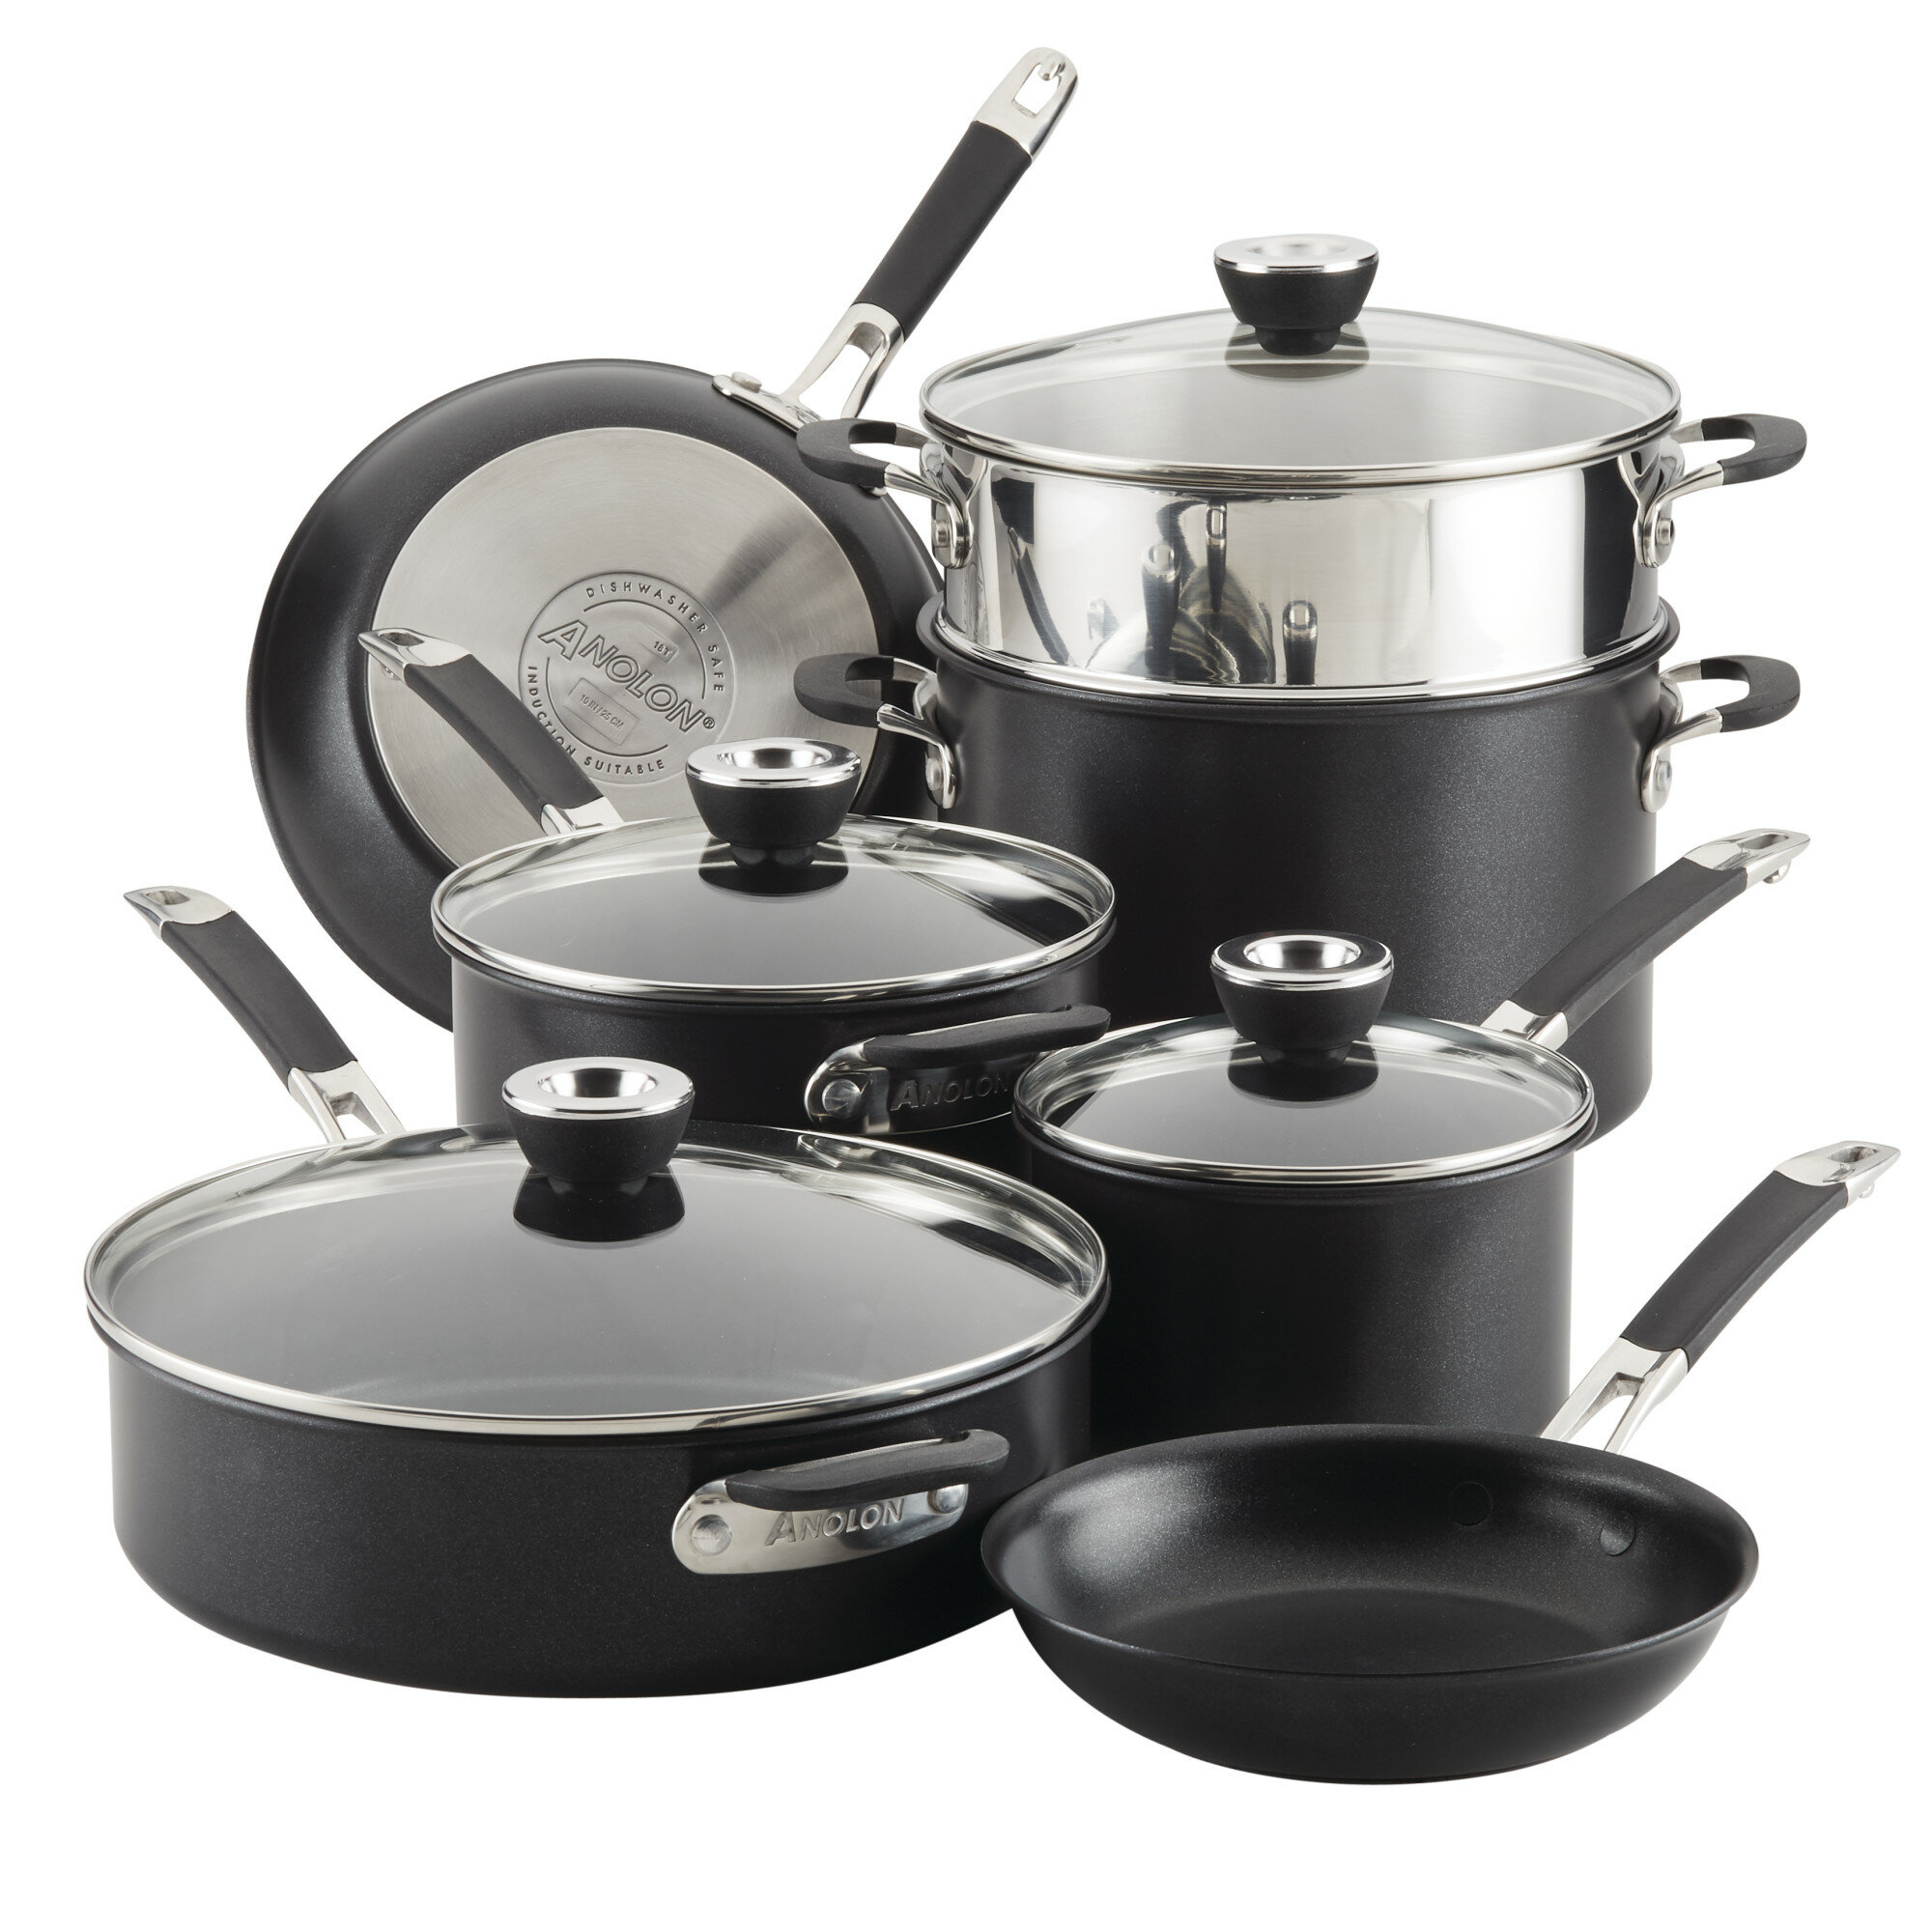 Meyer Accent Series 6pc Hard Anodized And Stainless Steel